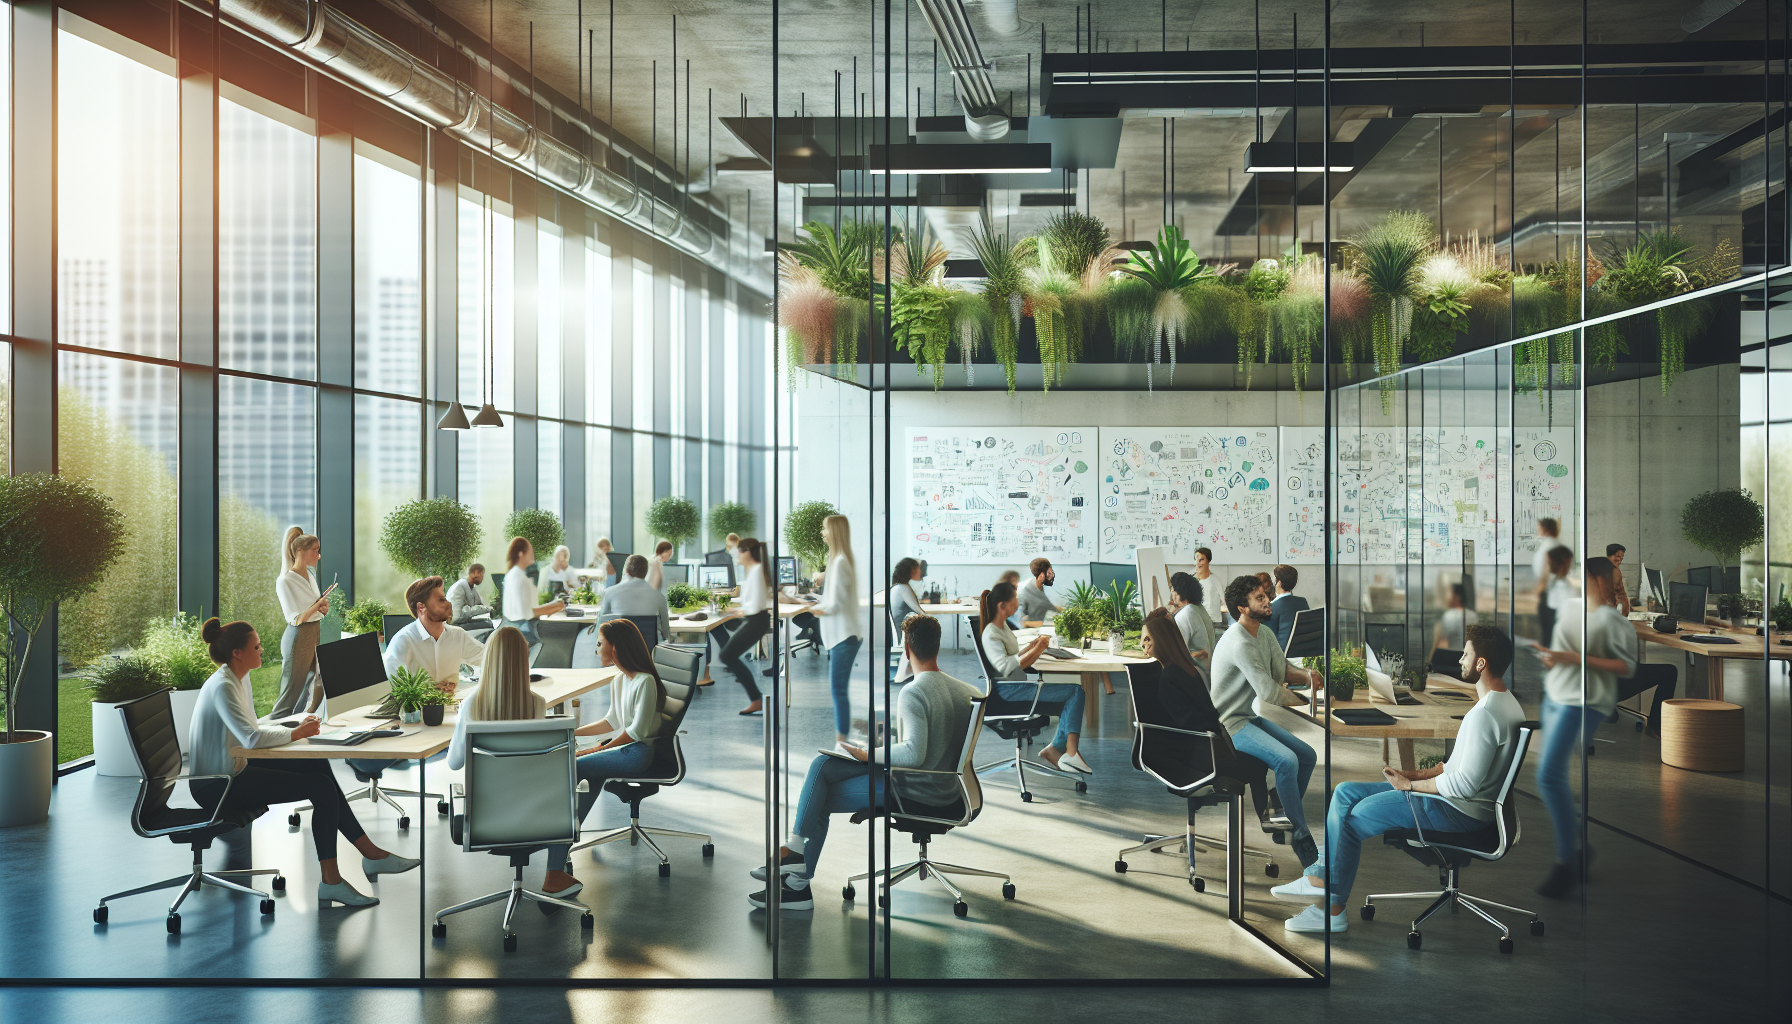 Innovative and creative workplace environment with employees brainstorming